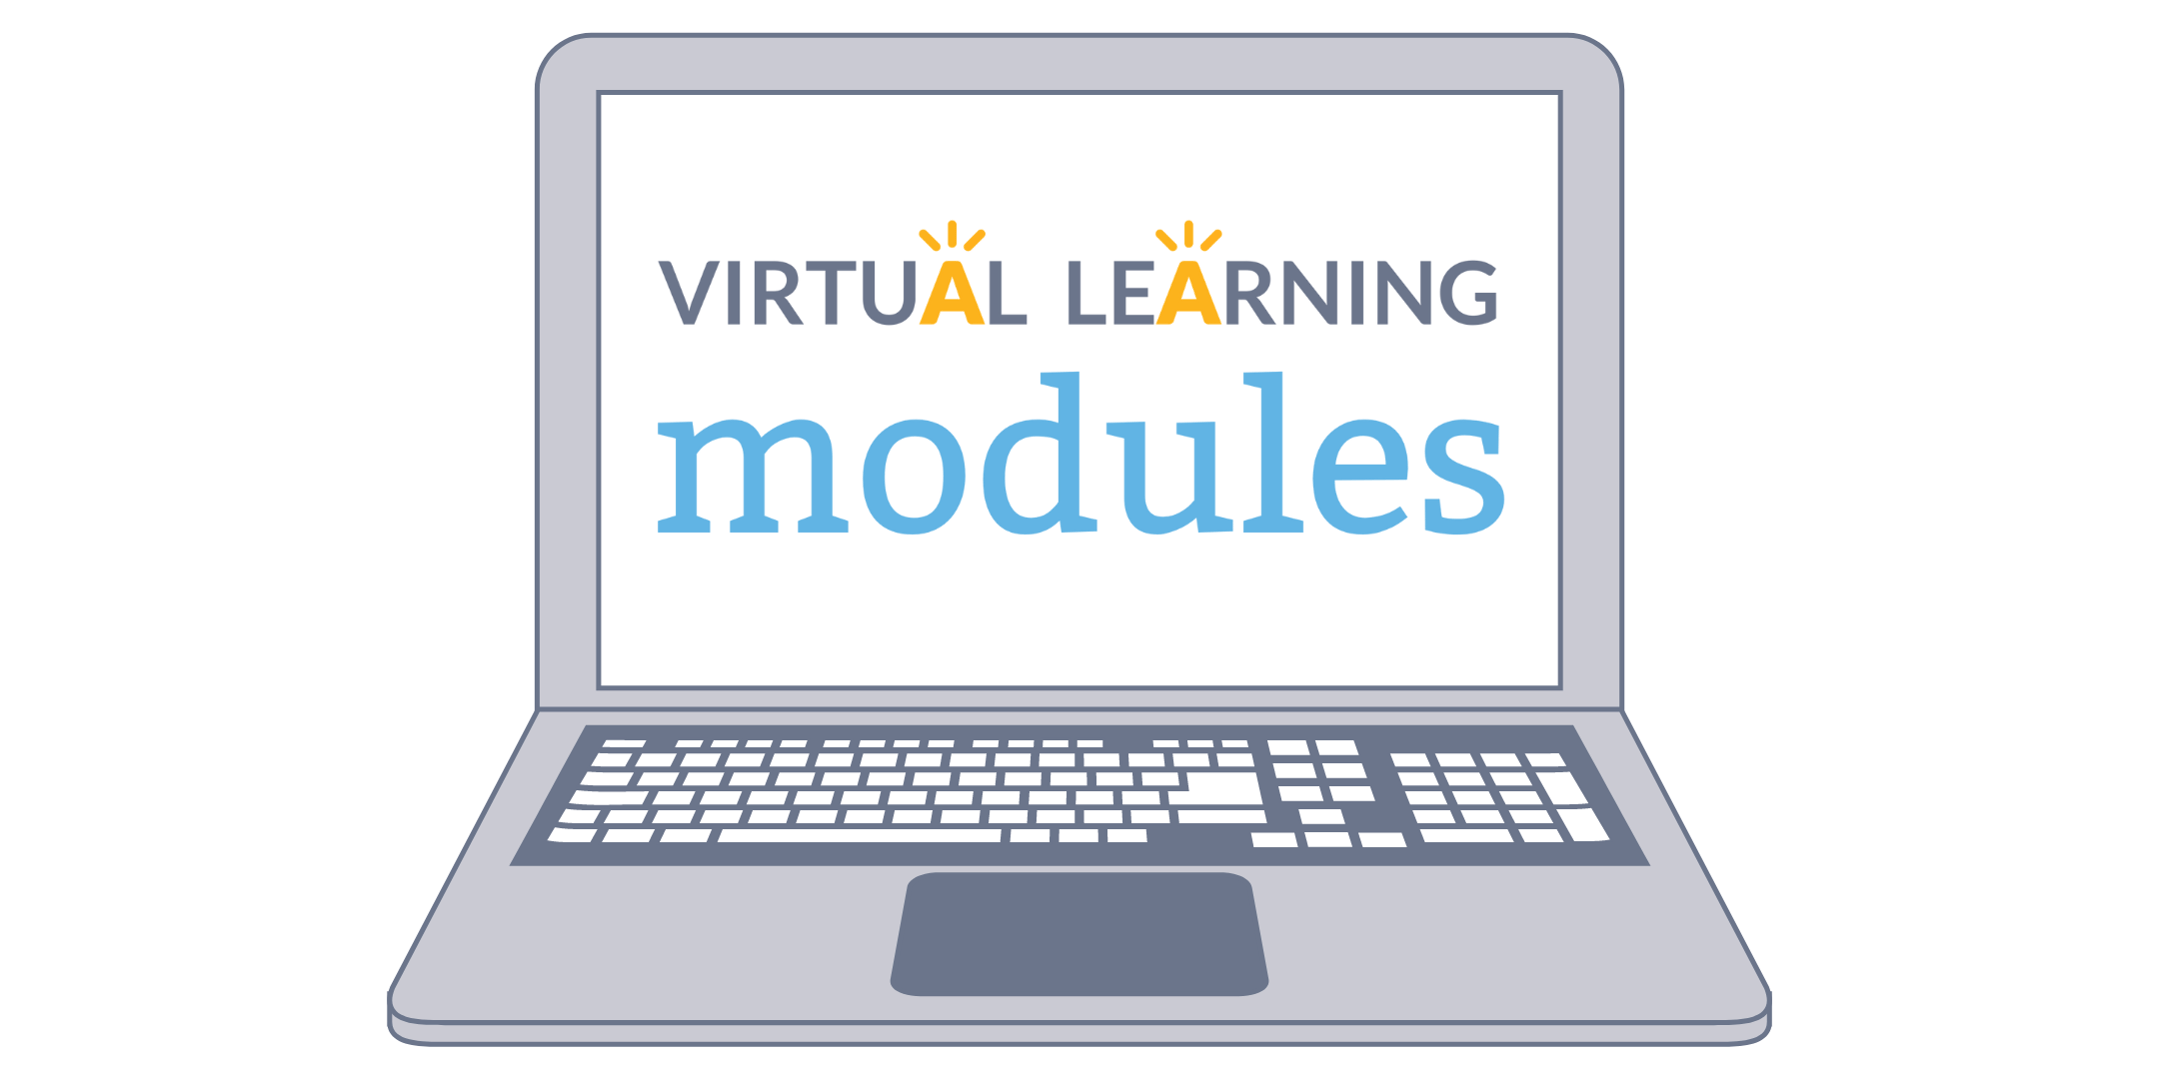 Achievement Network's virtual learning modules logo for educational leadership personalized learning and professional development for educators